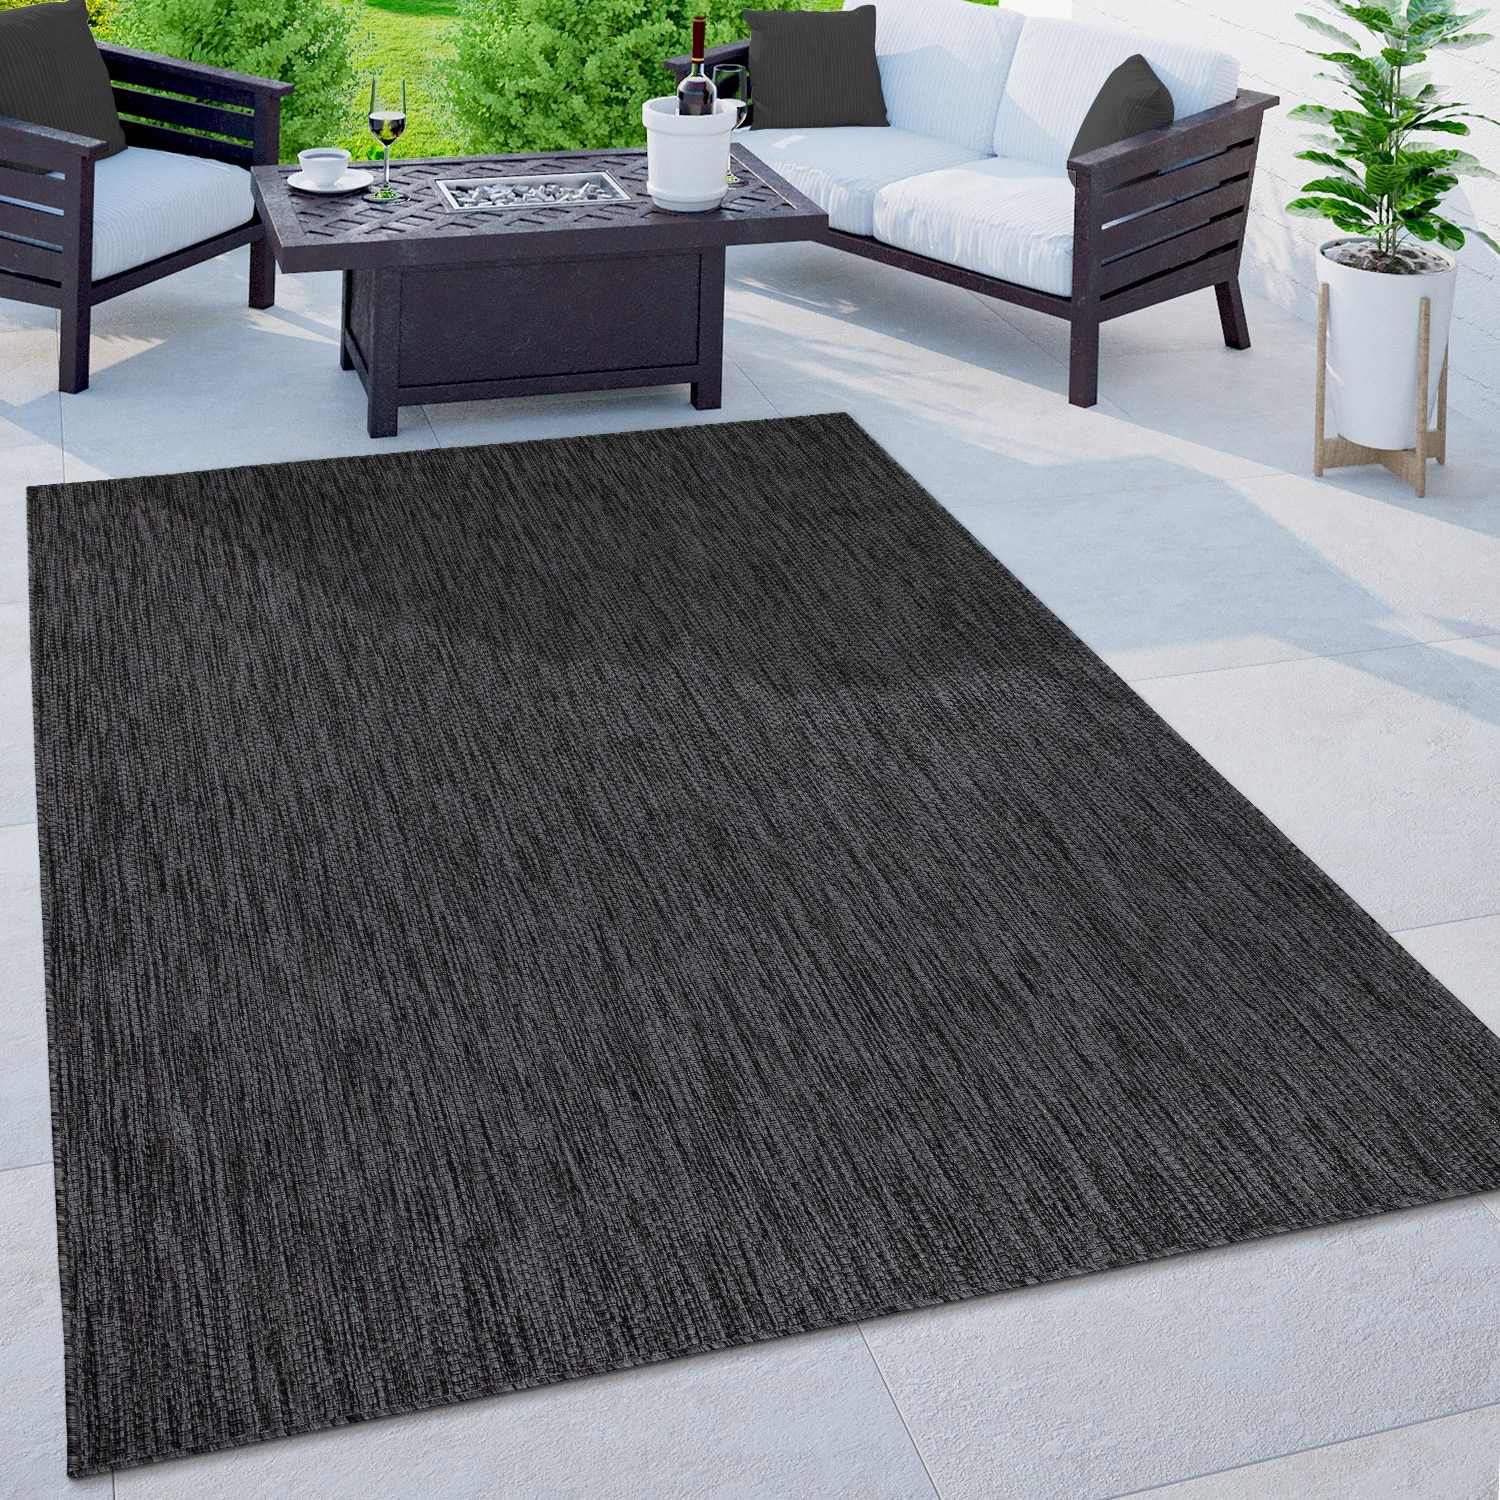 https://ak1.ostkcdn.com/images/products/is/images/direct/31aab7c341c0d413fb225cbc8444f061c45e84cd/Plain-Outdoor-Rug-Weatherproof-for-Patio-in-different-solid-colors.jpg